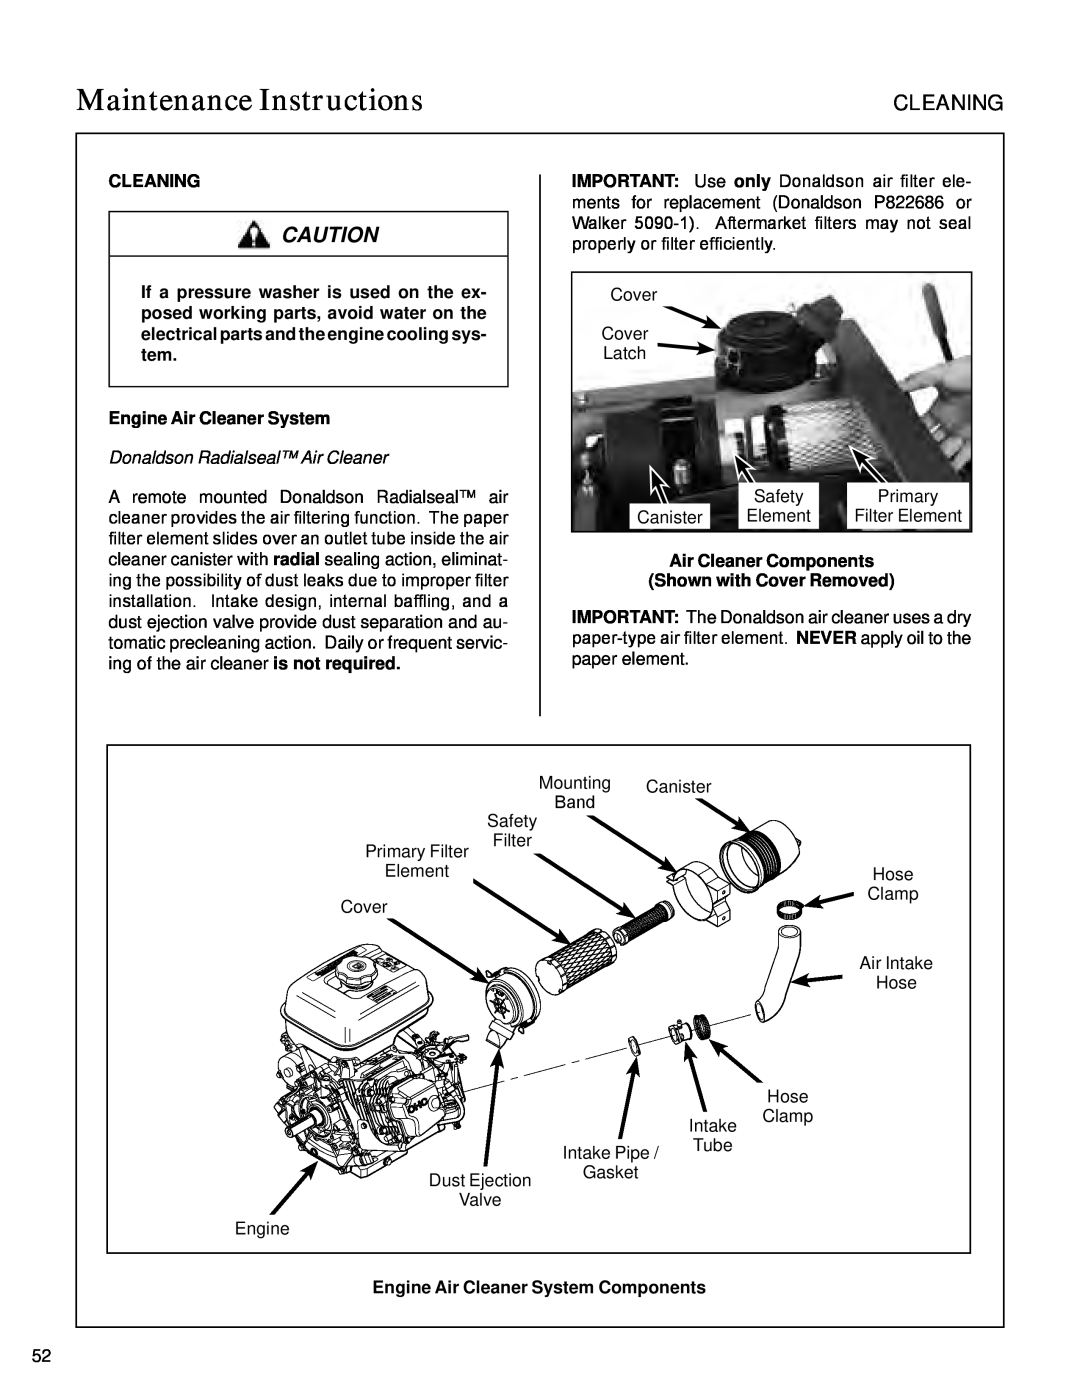 Walker S14 Cleaning, Donaldson Radialseal Air Cleaner, Engine Air Cleaner System Components, Maintenance Instructions 